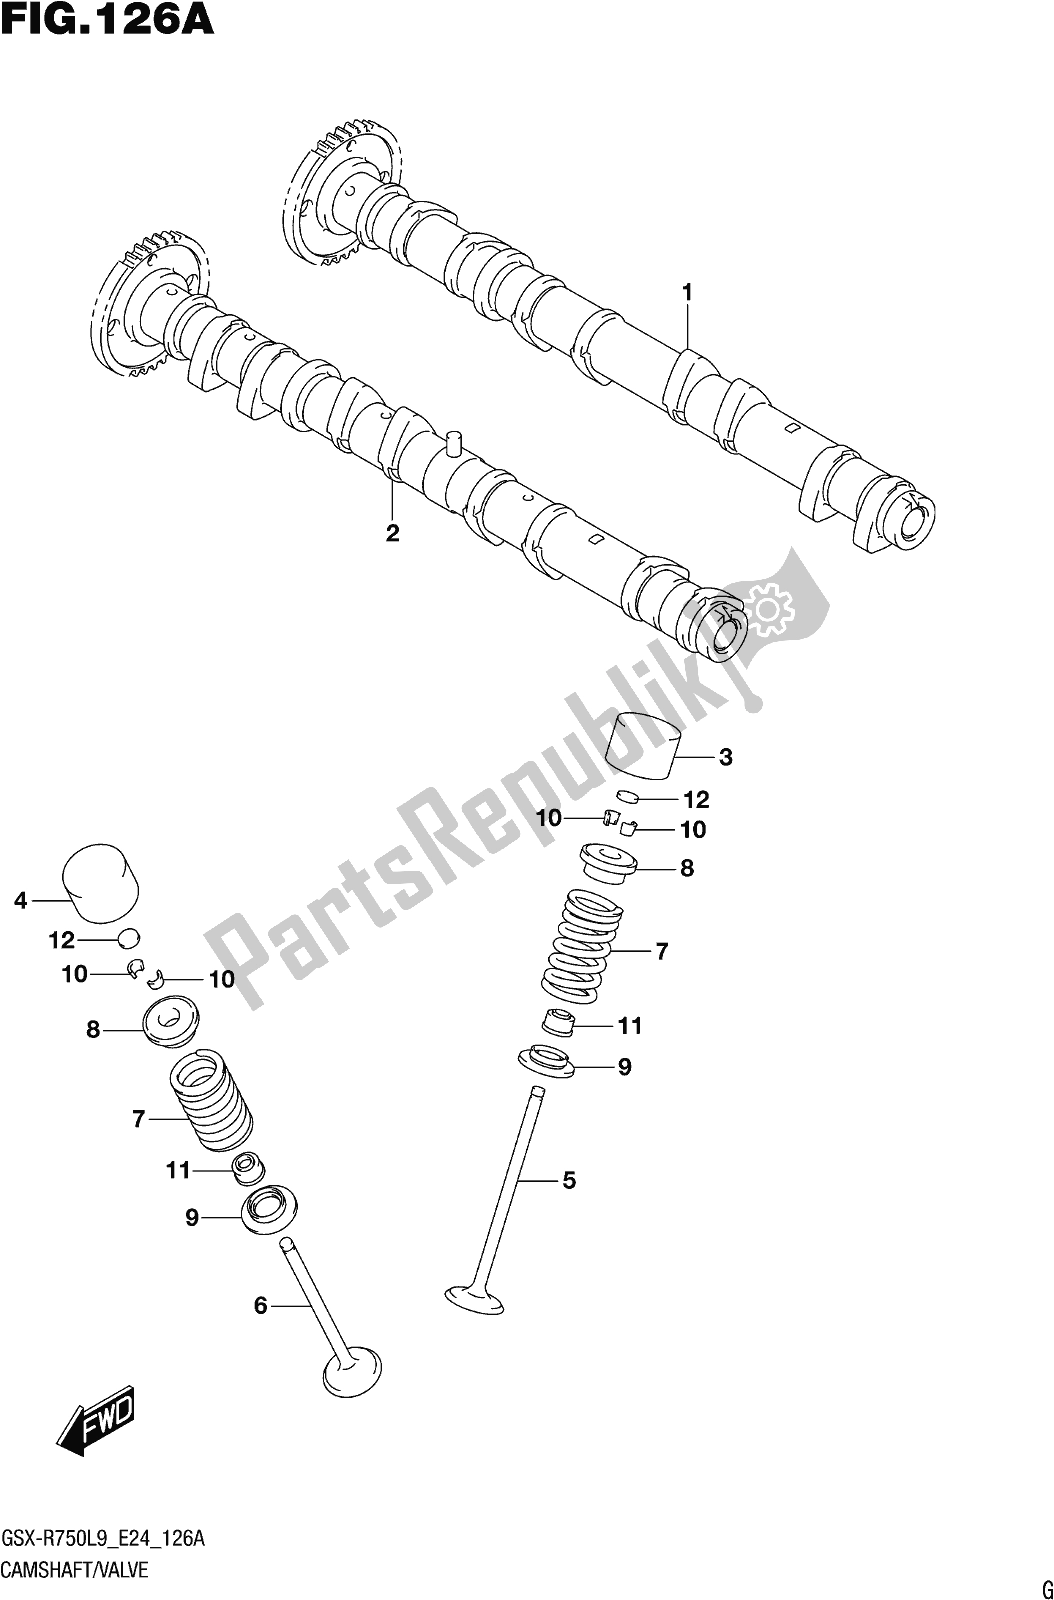 All parts for the Fig. 126a Camshaft/valve of the Suzuki Gsx-r 750 2019